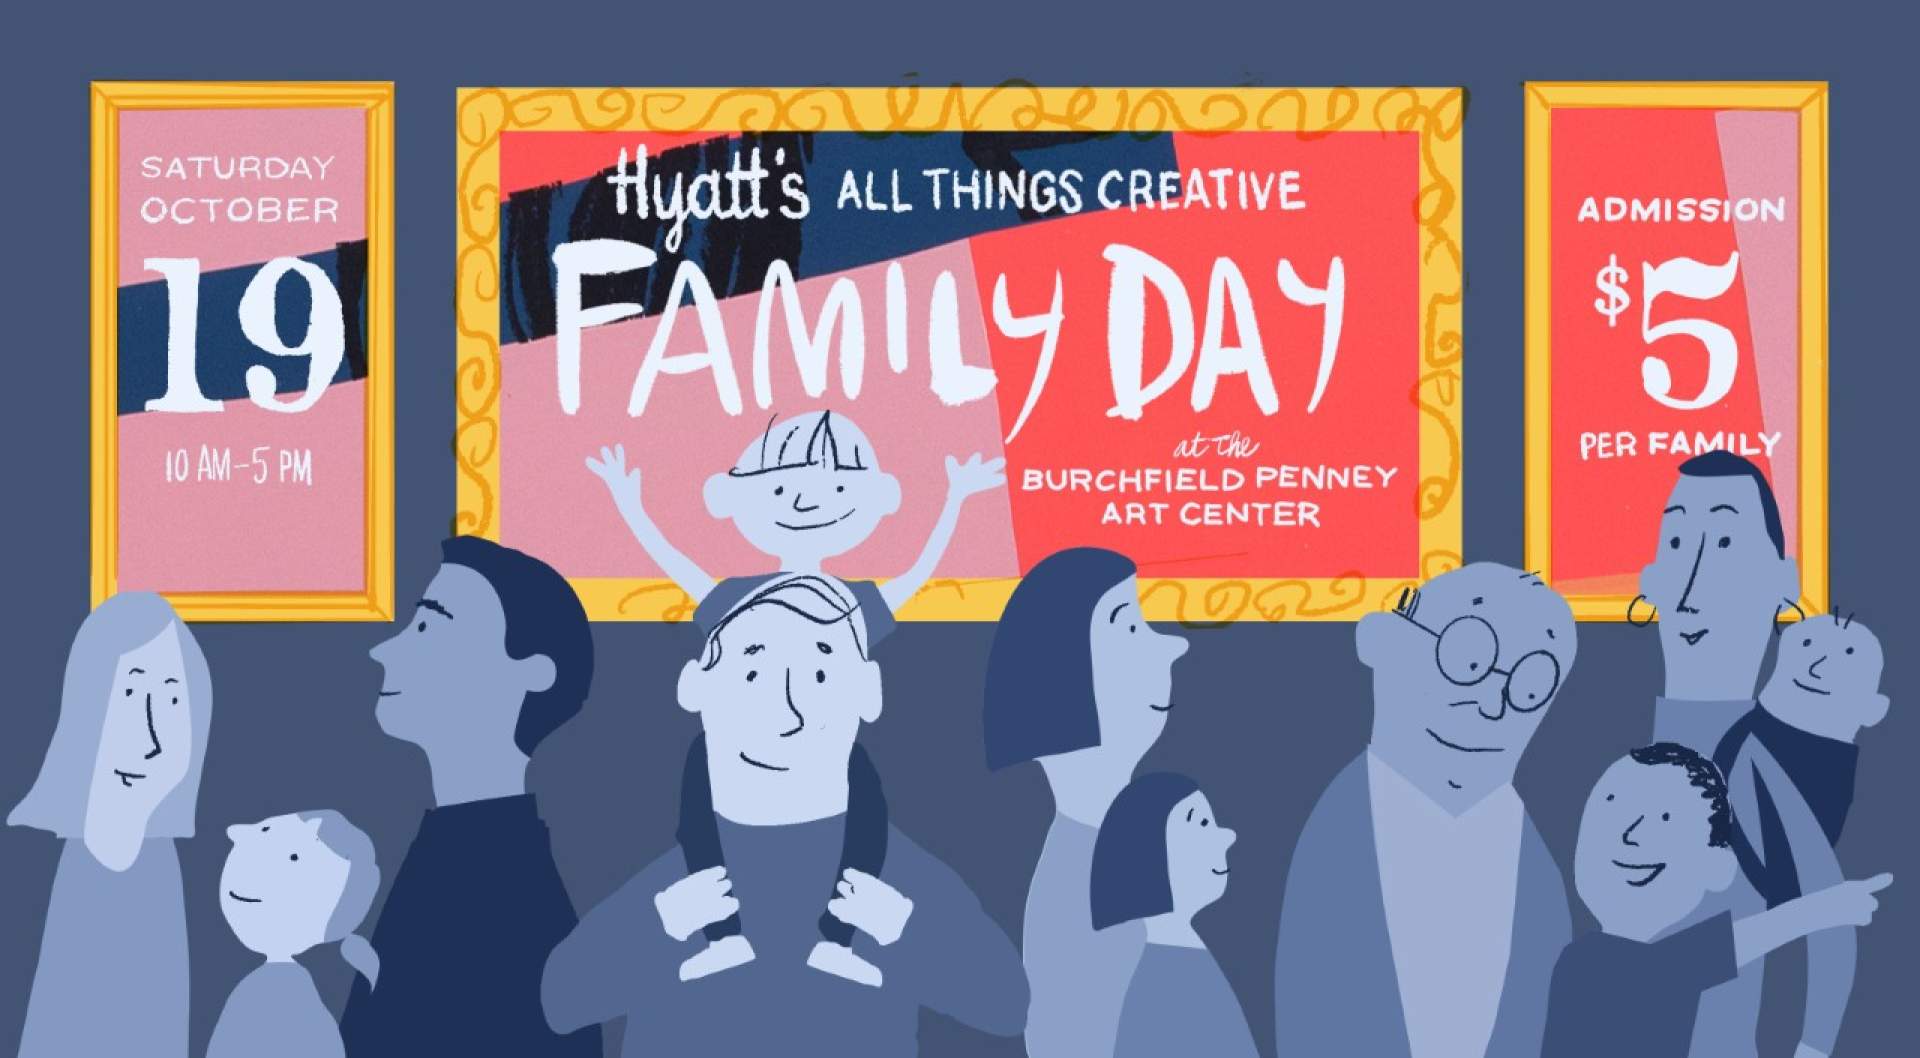 Hyatt's All Things Creative $5 Family Day at the Burchfield Penney